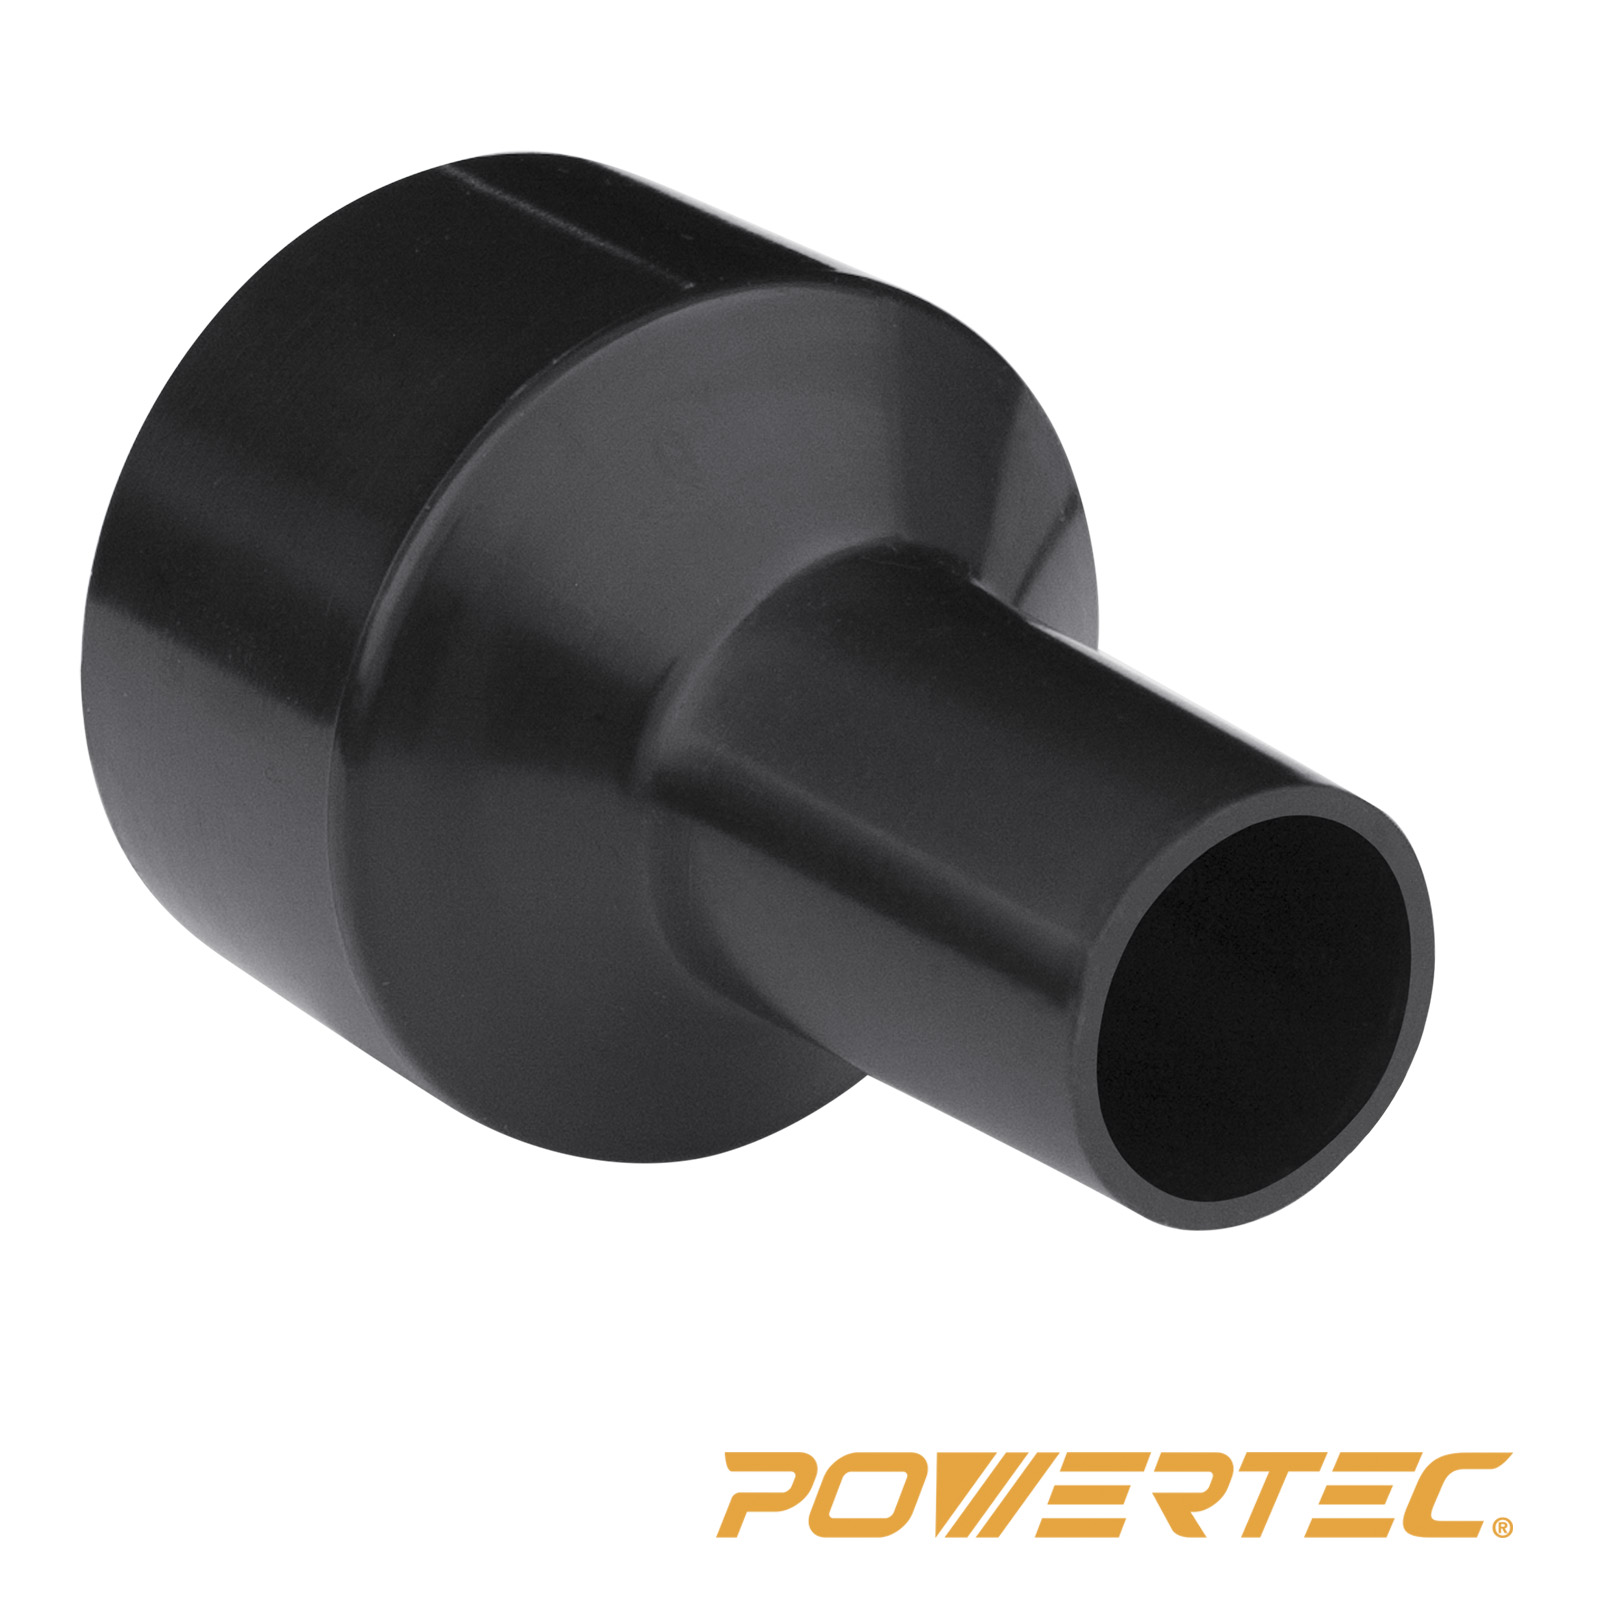 Powertec 70140 2-1/2-Inch to 1-1/4-Inch Reducer